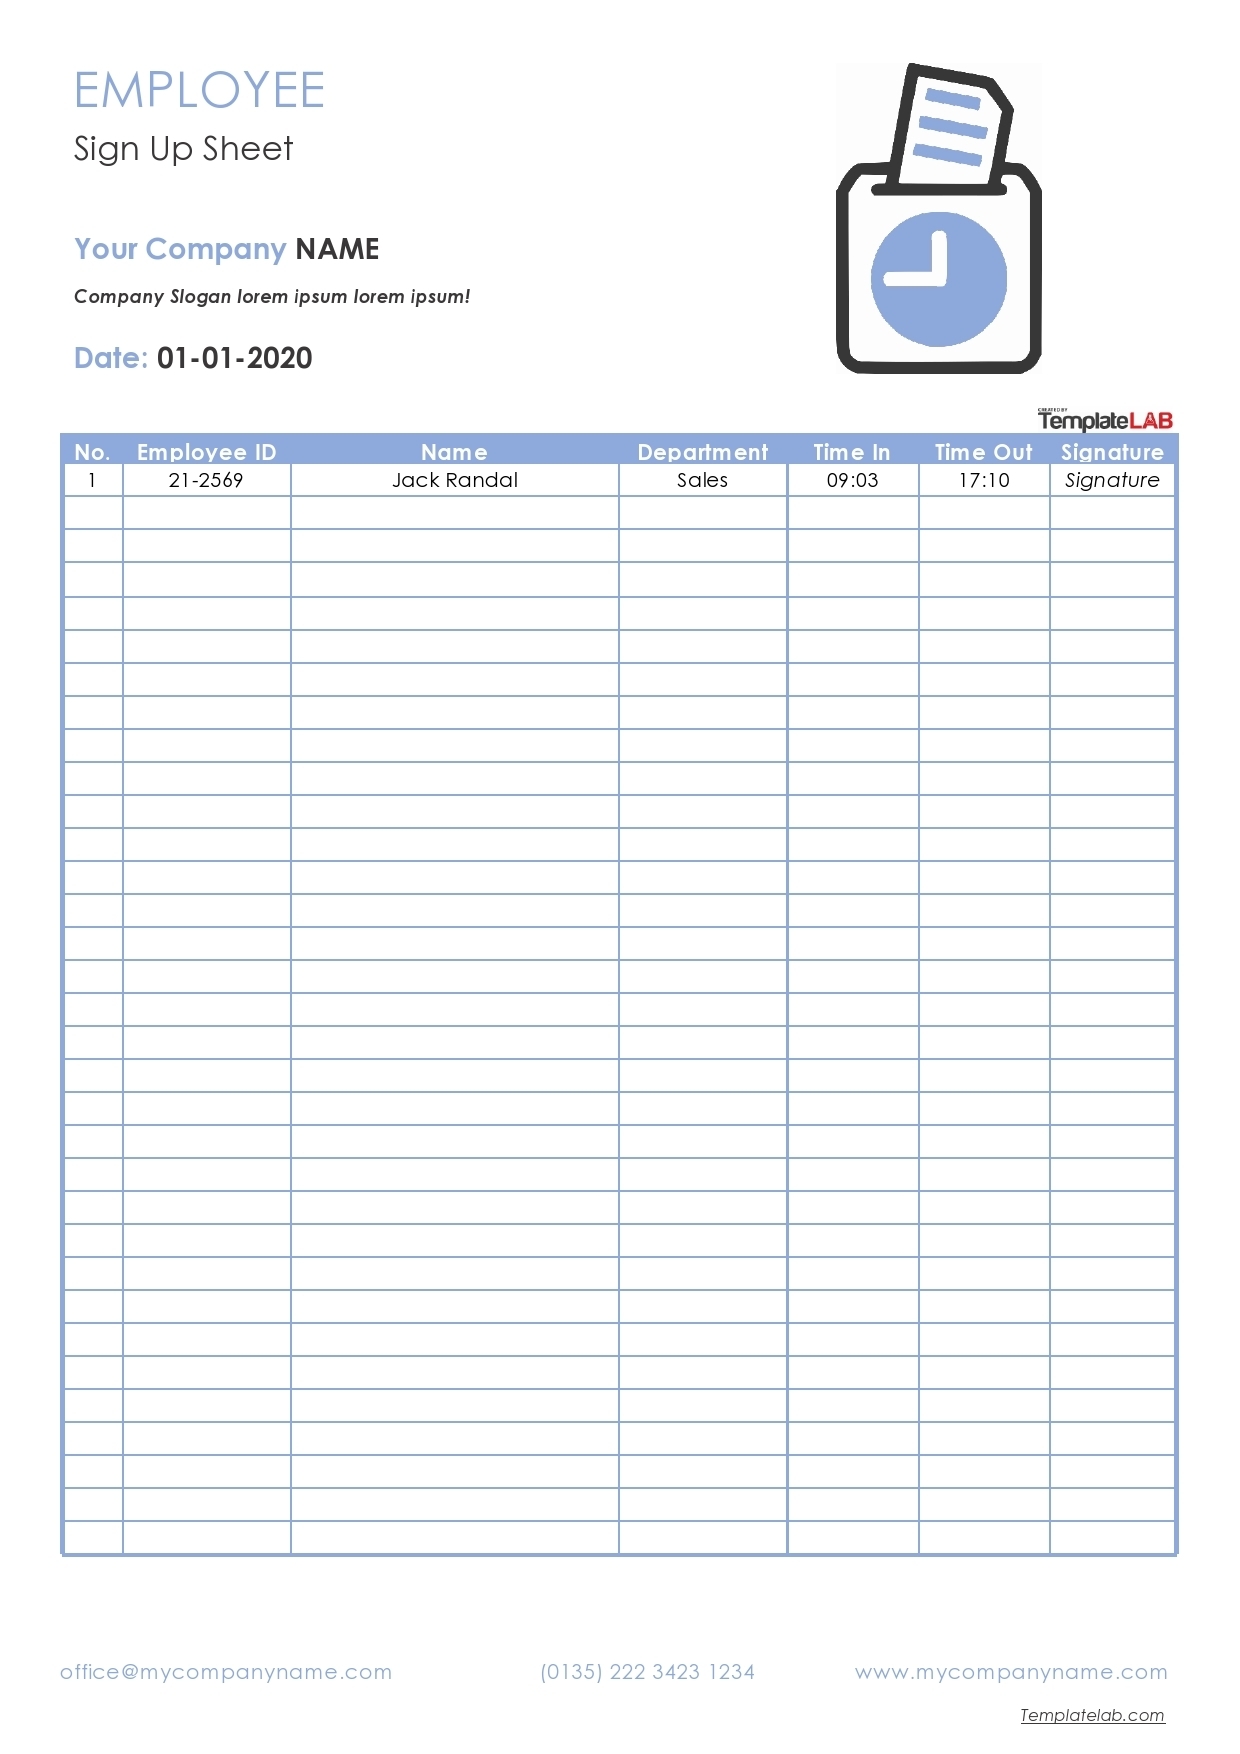 time-slot-sign-up-sheet-template-excel-best-calendar-example